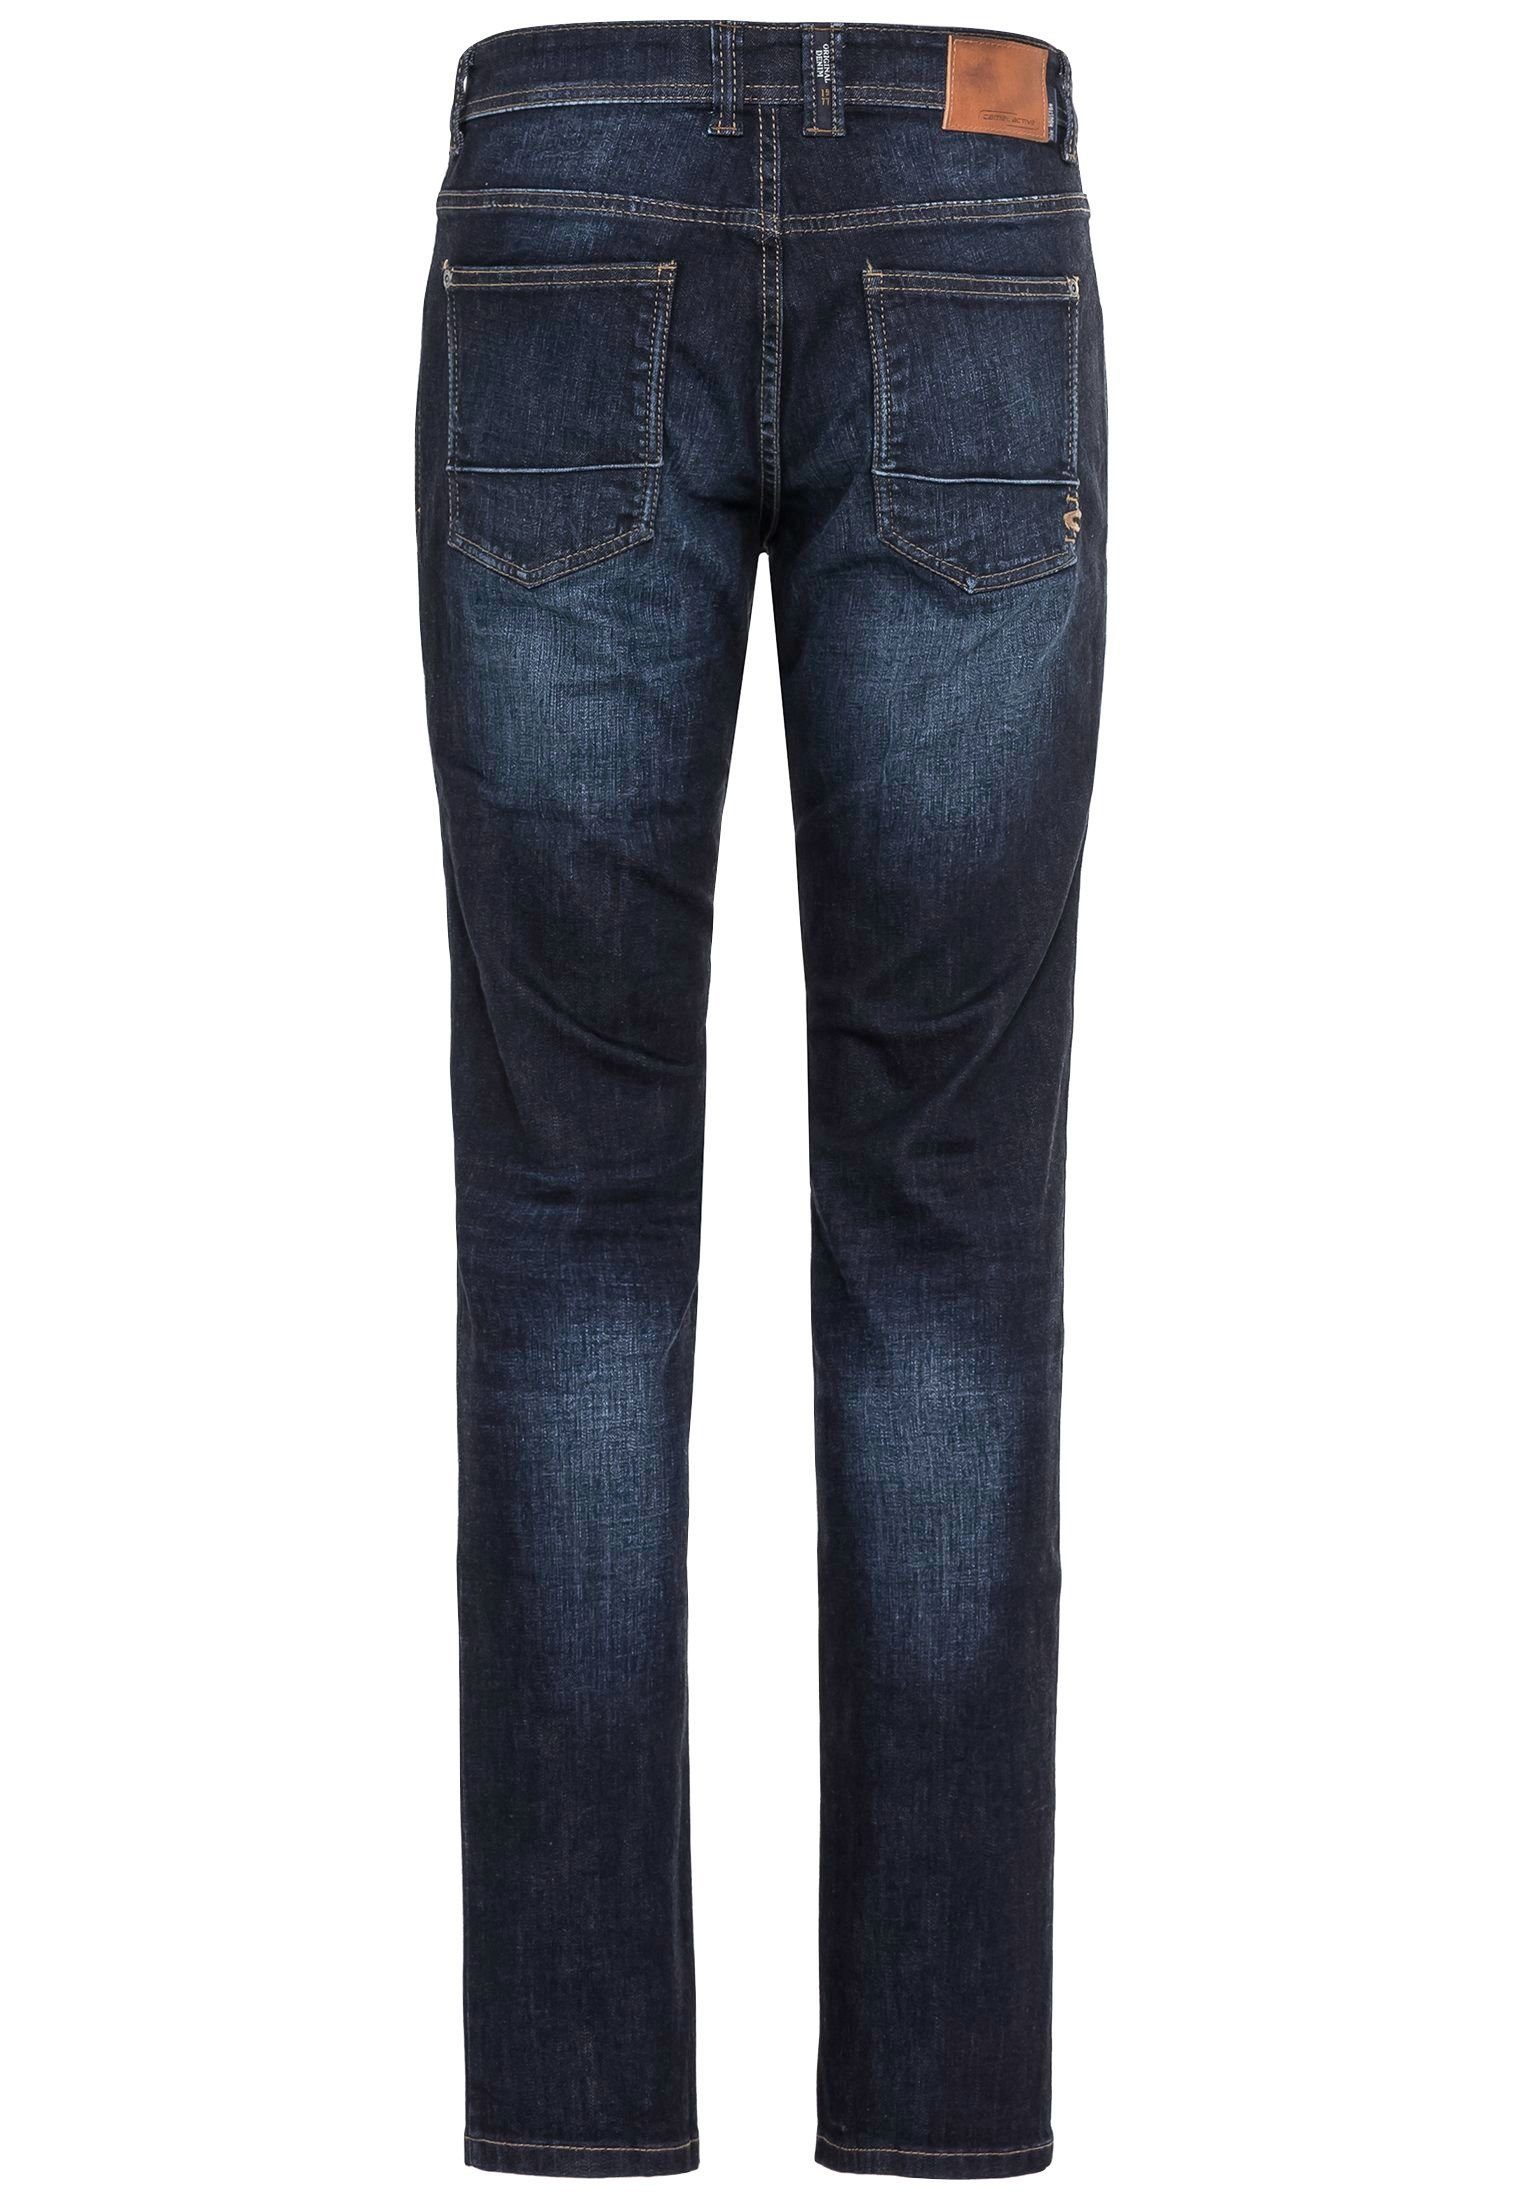 camel active Straight-Jeans